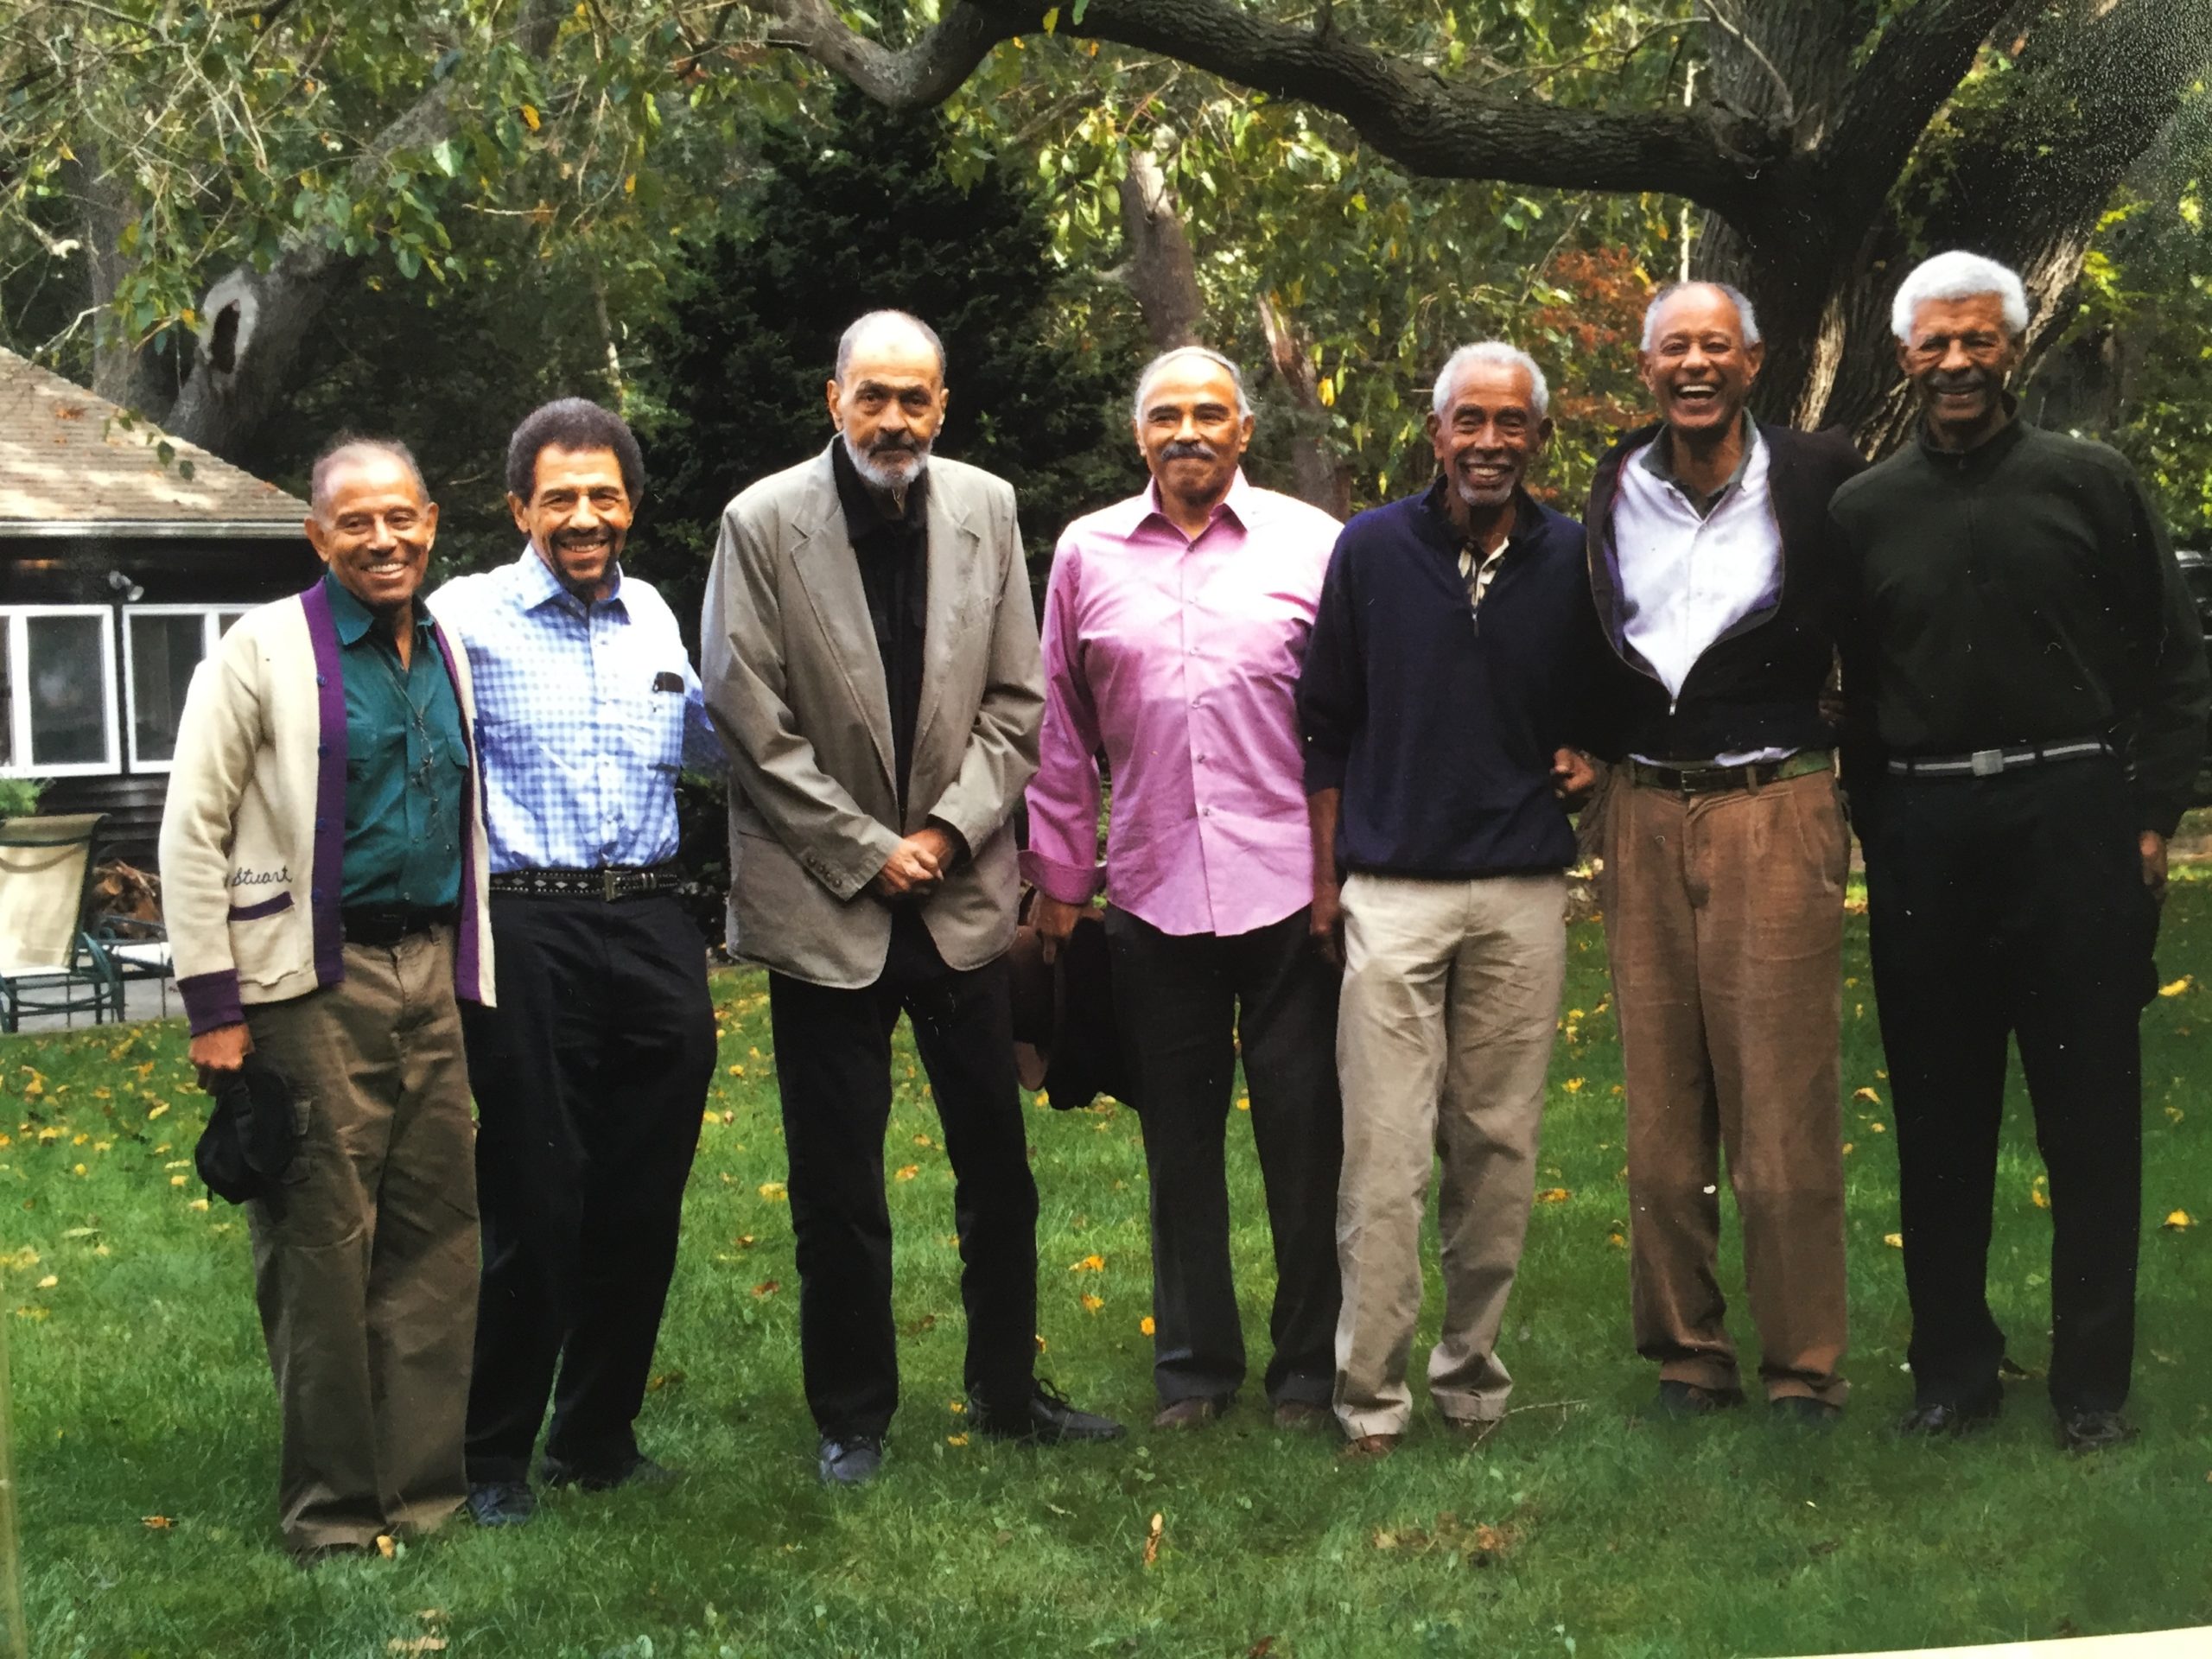 William Pickens III, far right, with his friends, from left: Dr. Stuart R. Taylor, Dr. Phillip Taylor, Tony Johnson, Thomas Watkins, Benjamin Finley, and E.T. Williams, Jr. Behind them is a tree where Langston Hughes once sat to write poetry during a visit to Sag Harbor. The friends grew up together in the Bedford-Stuyvestant section of Brooklyn and spent summer together in Sag Harbor. They were all members of the Centurion Club, a social club based in New York City.